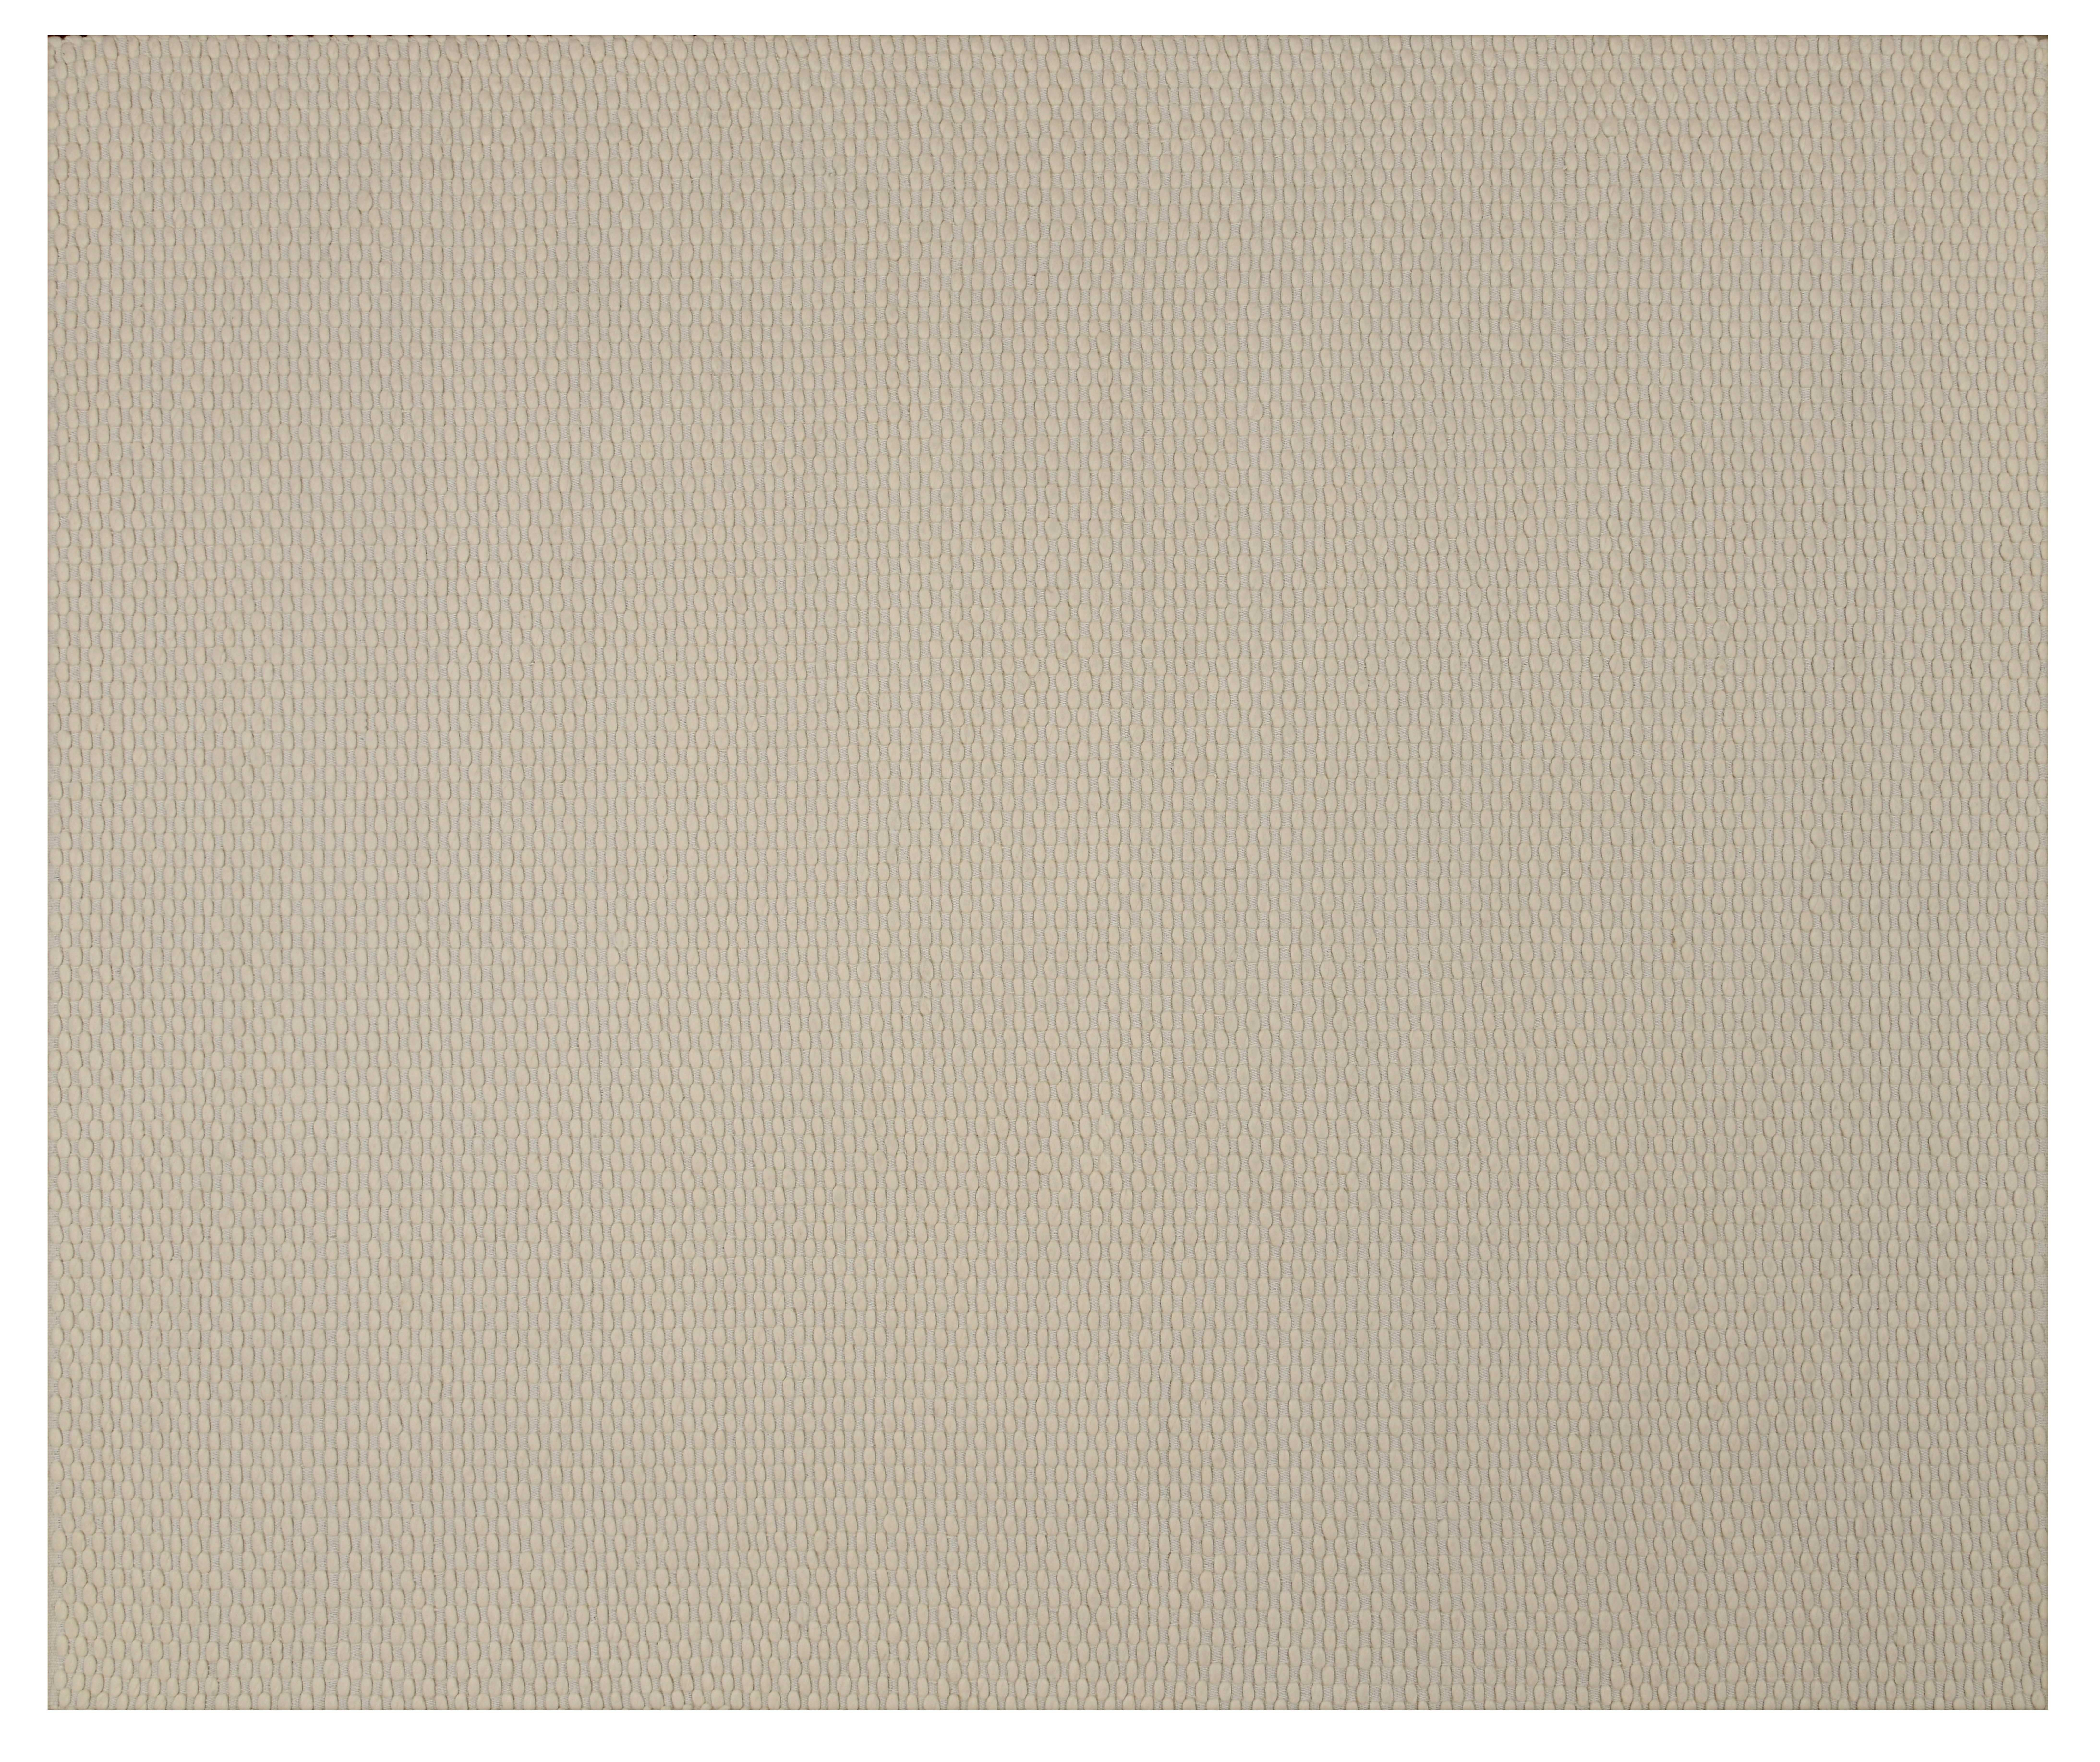 Choma, Ivory, Handwoven Face 72% Undyed New Zealand Wool/28% Cotton, 8' x 10' For Sale 1